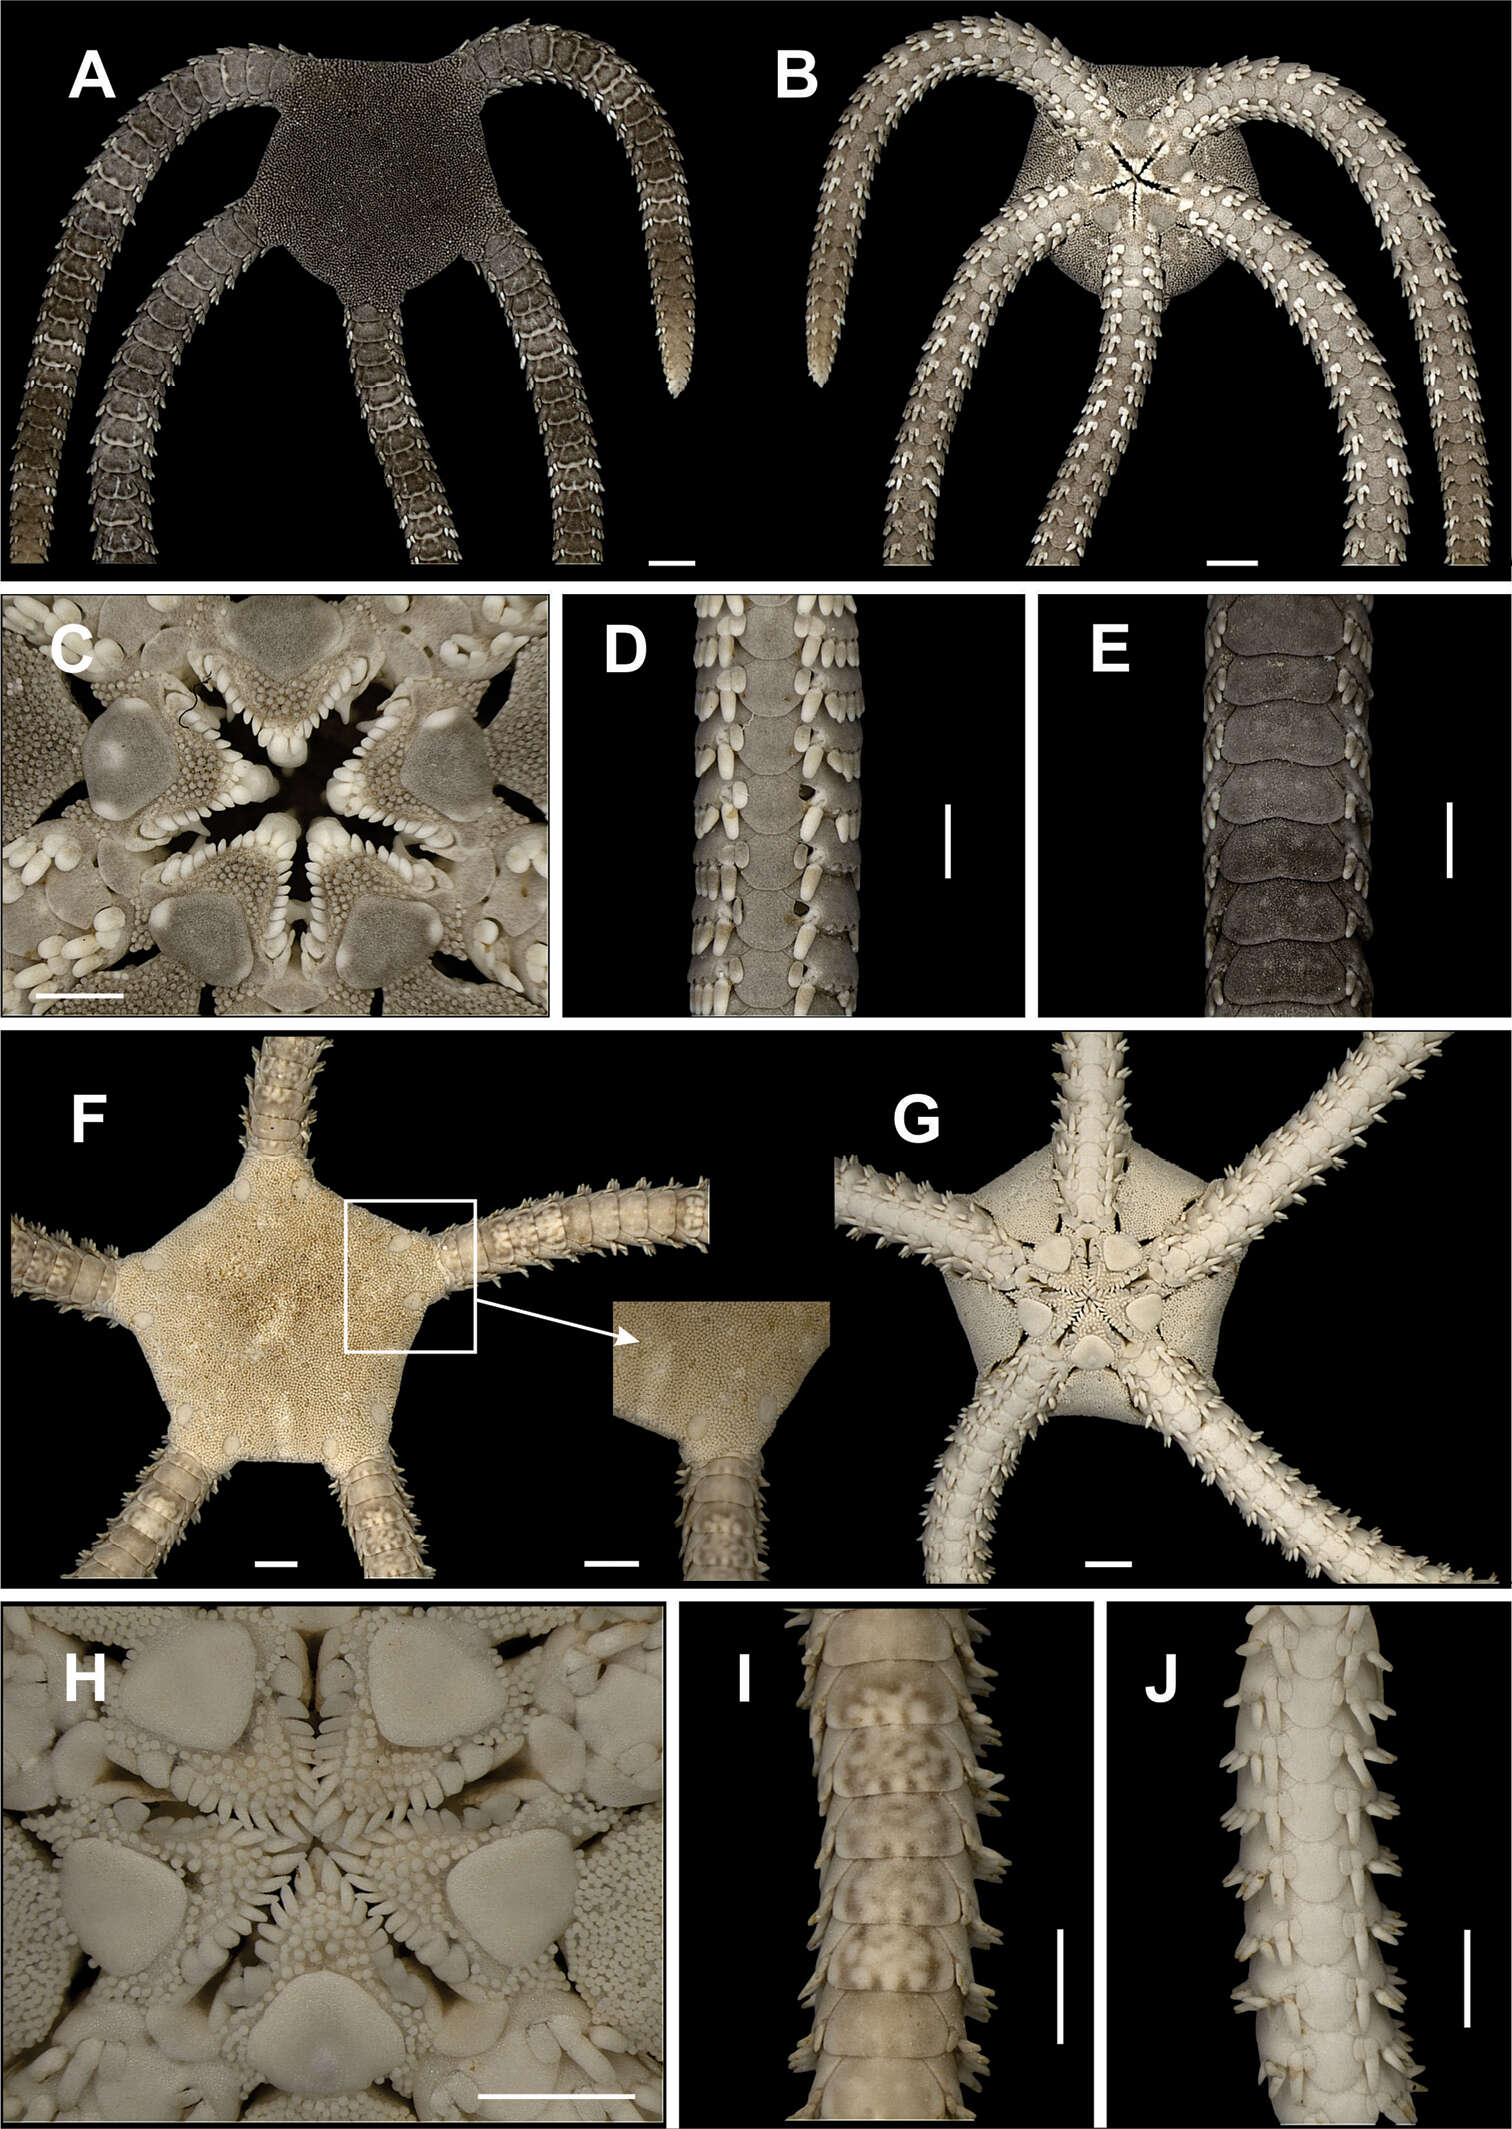 Image of ophiodermatid brittle stars